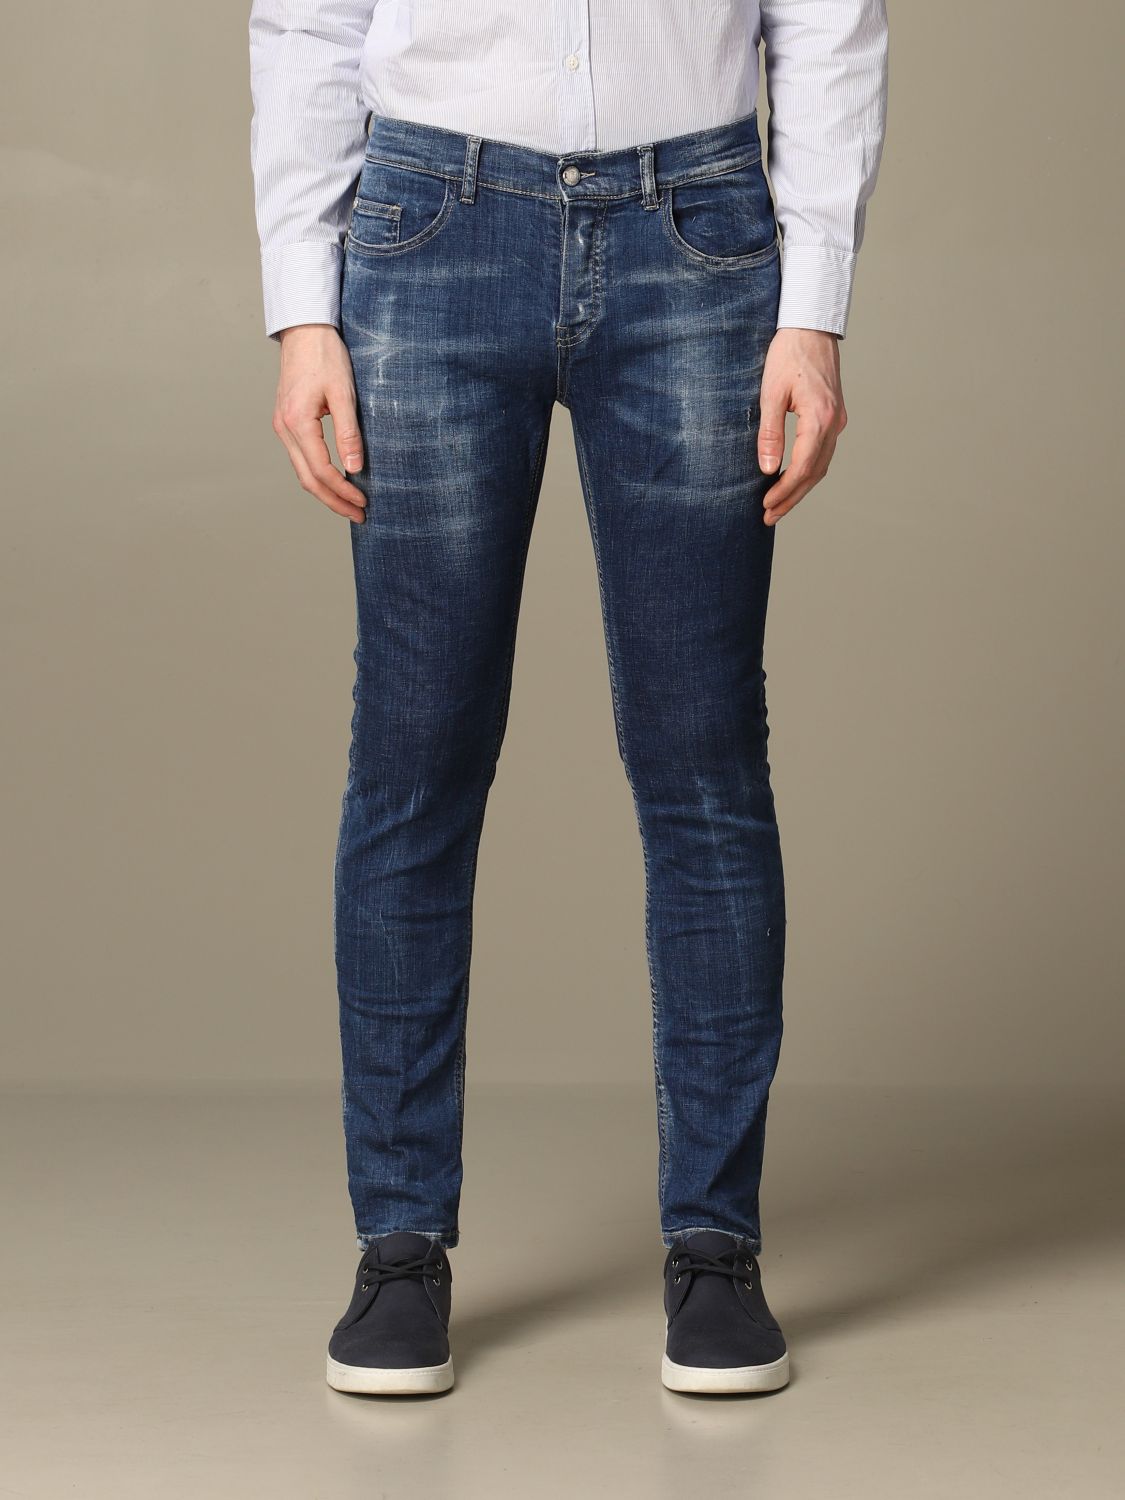 Frankie Morello Outlet: skinny fit with tears - Denim | Frankie Morello jeans FMS0005JE 1000 online on GIGLIO.COM